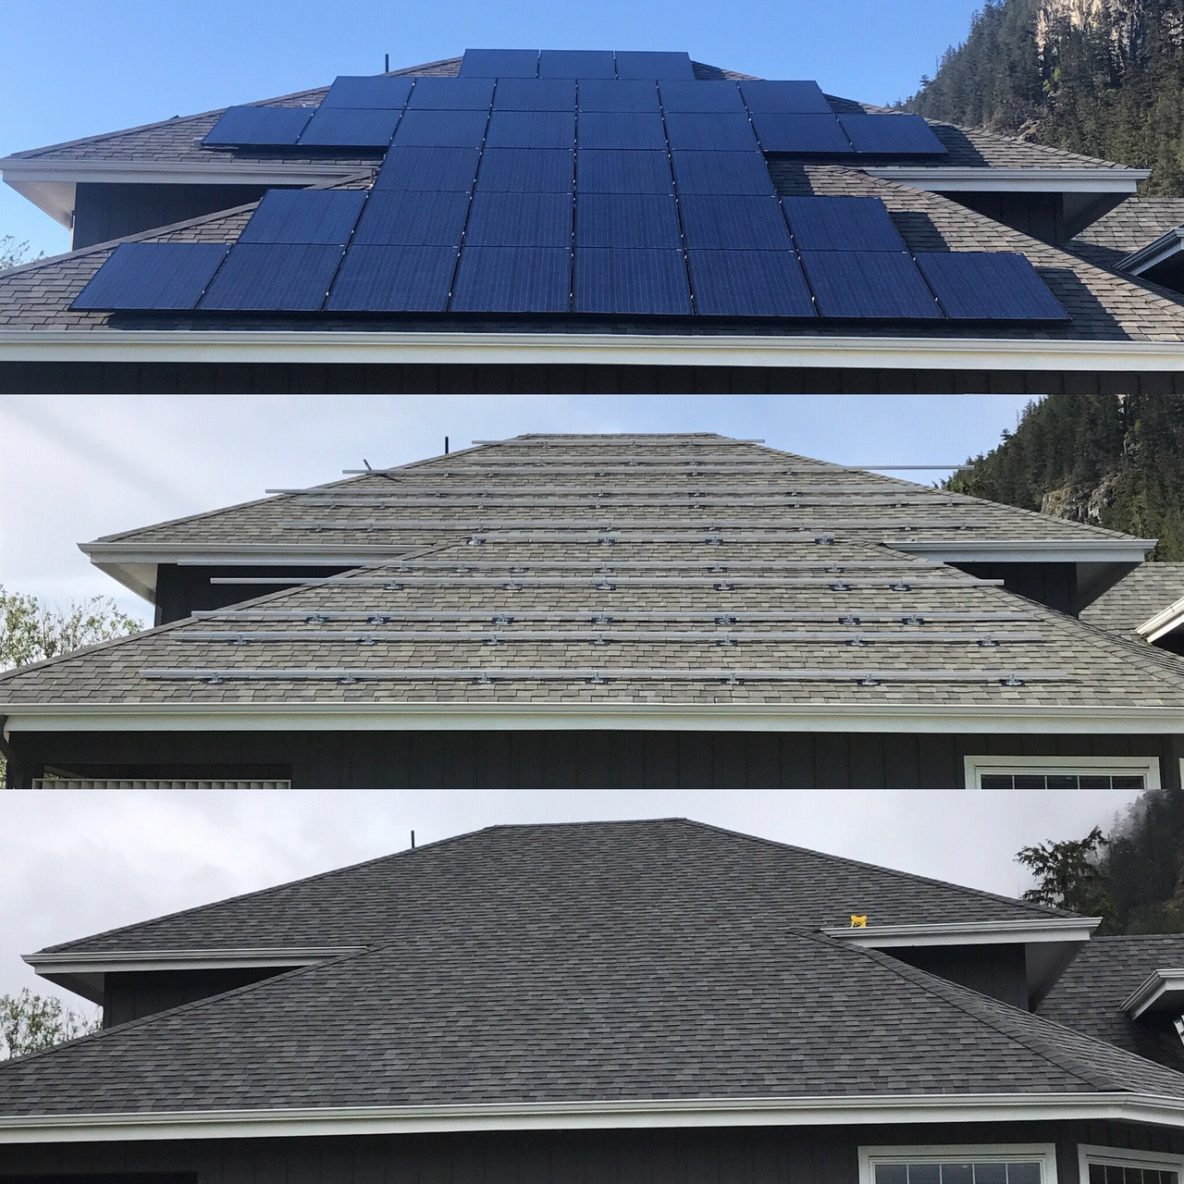 A before and after photos of a home roof with solar panels in Squamish